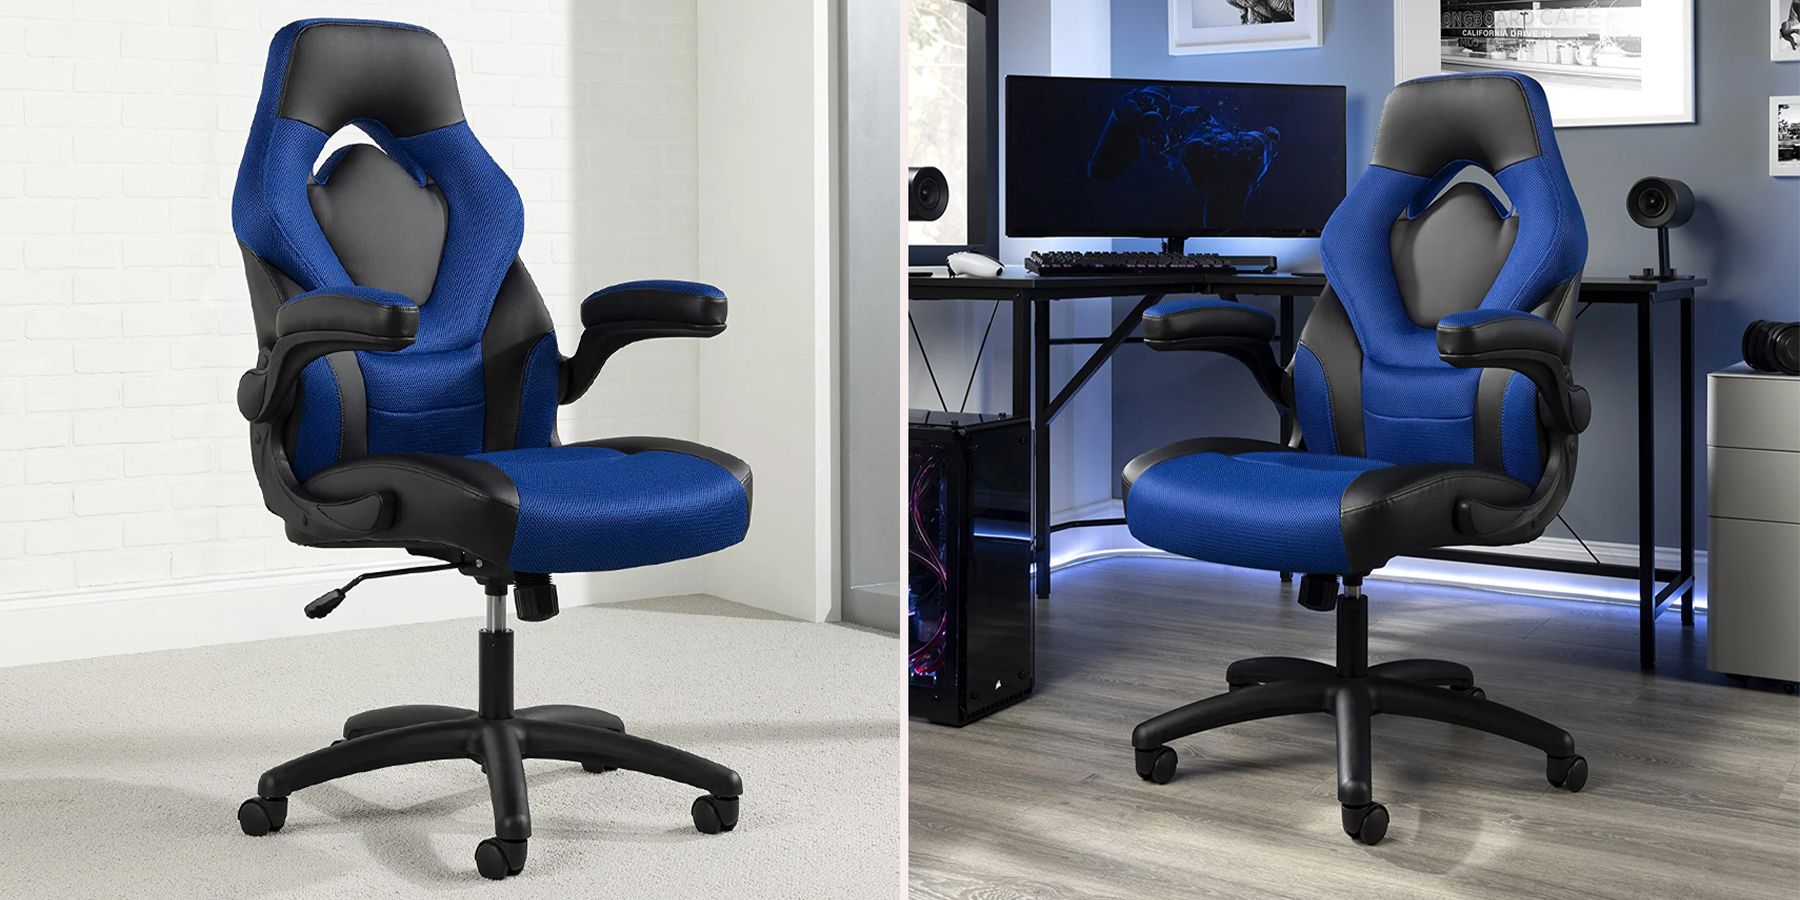 OFM Gaming Chair Ergonomic Racing Style PC